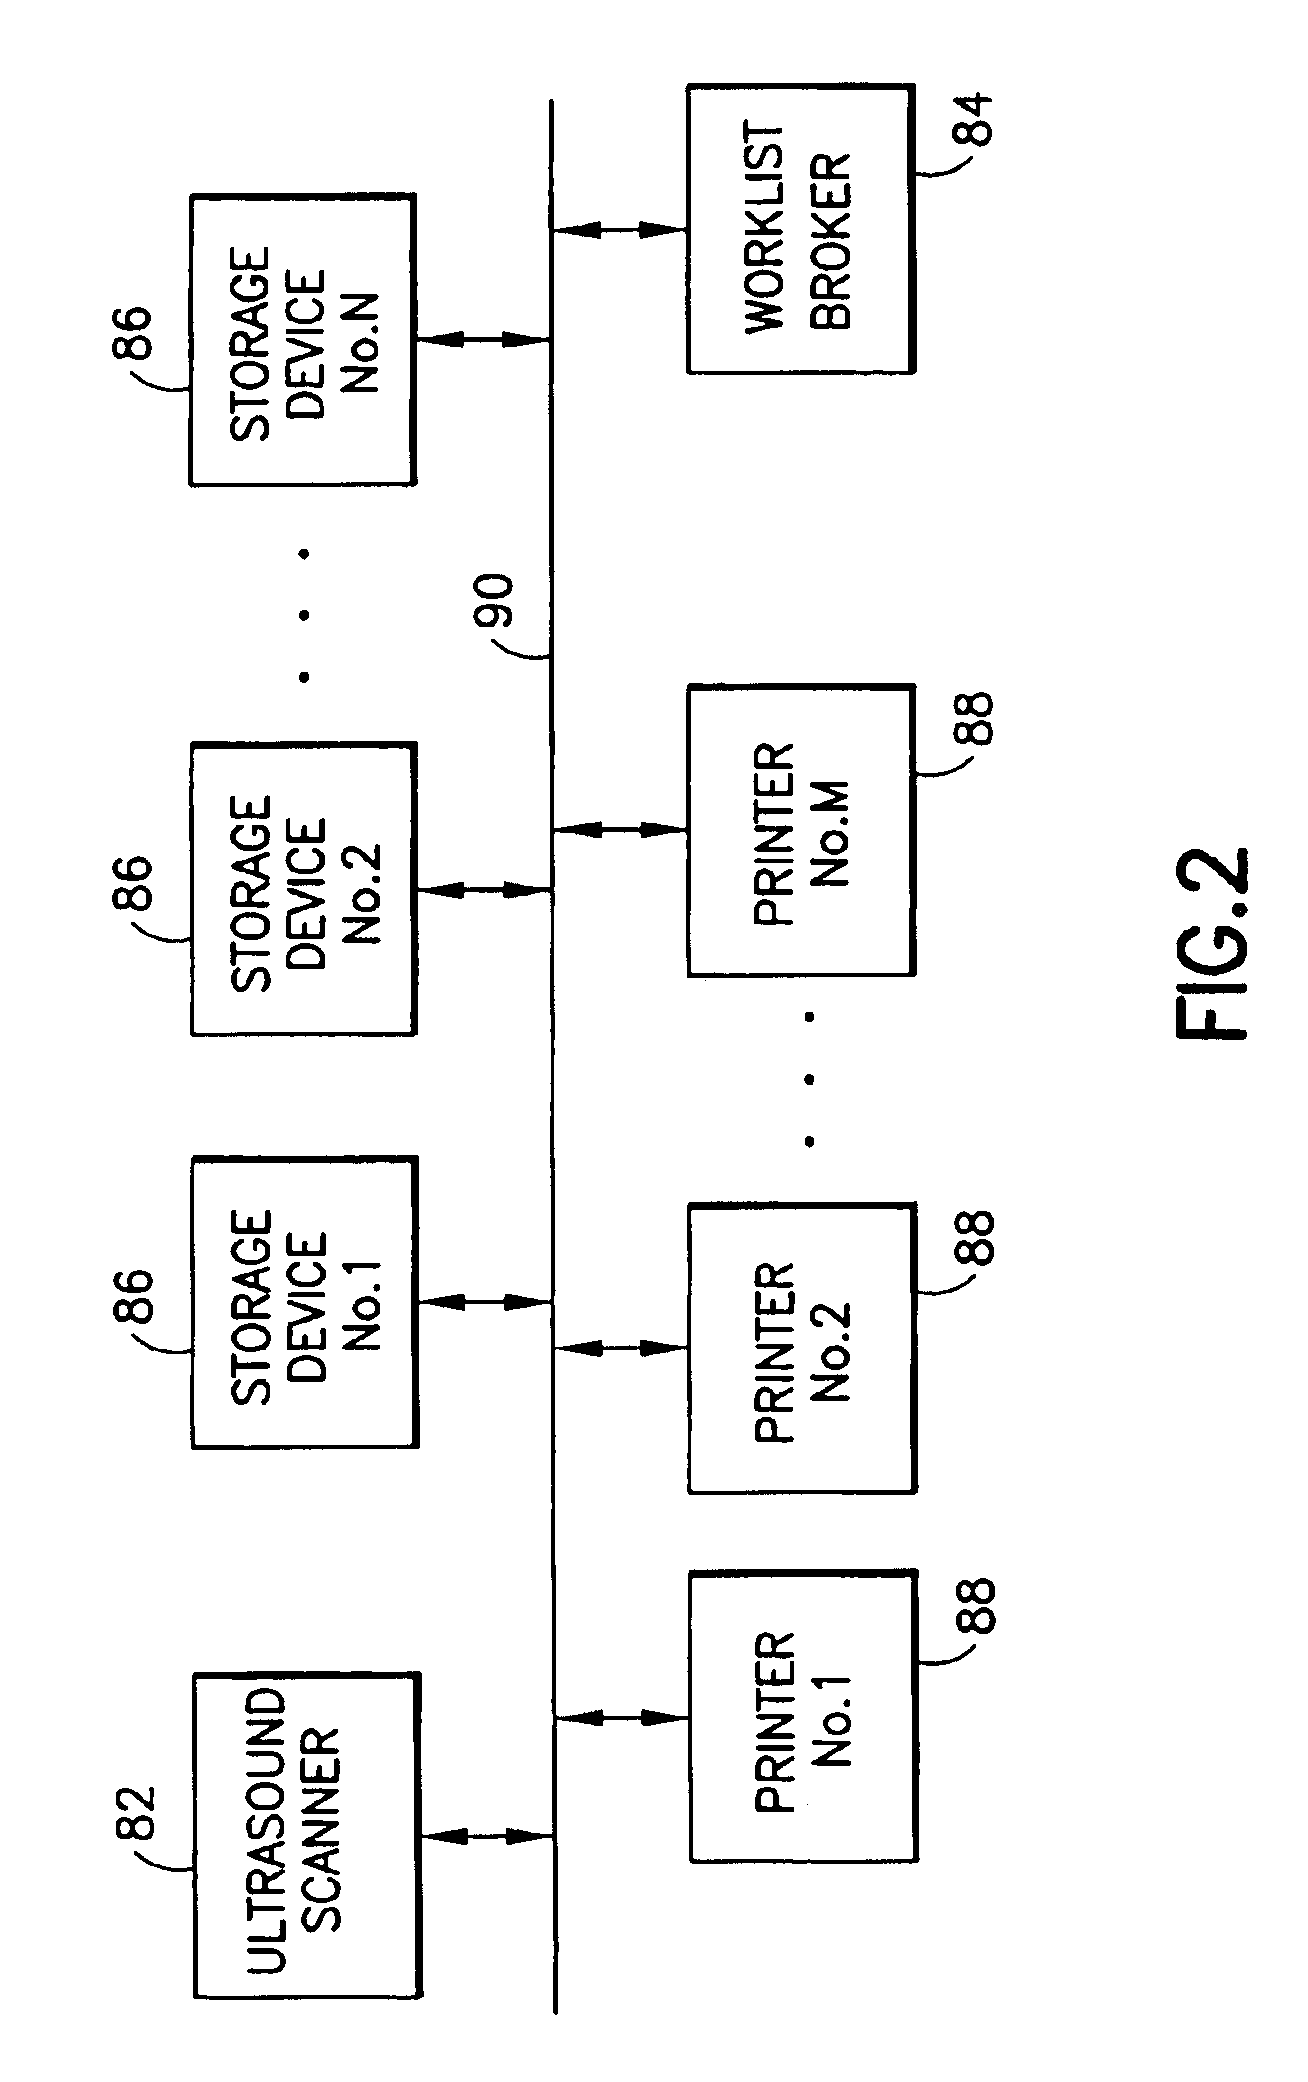 Method and apparatus for requesting and displaying worklist data from remotely located device